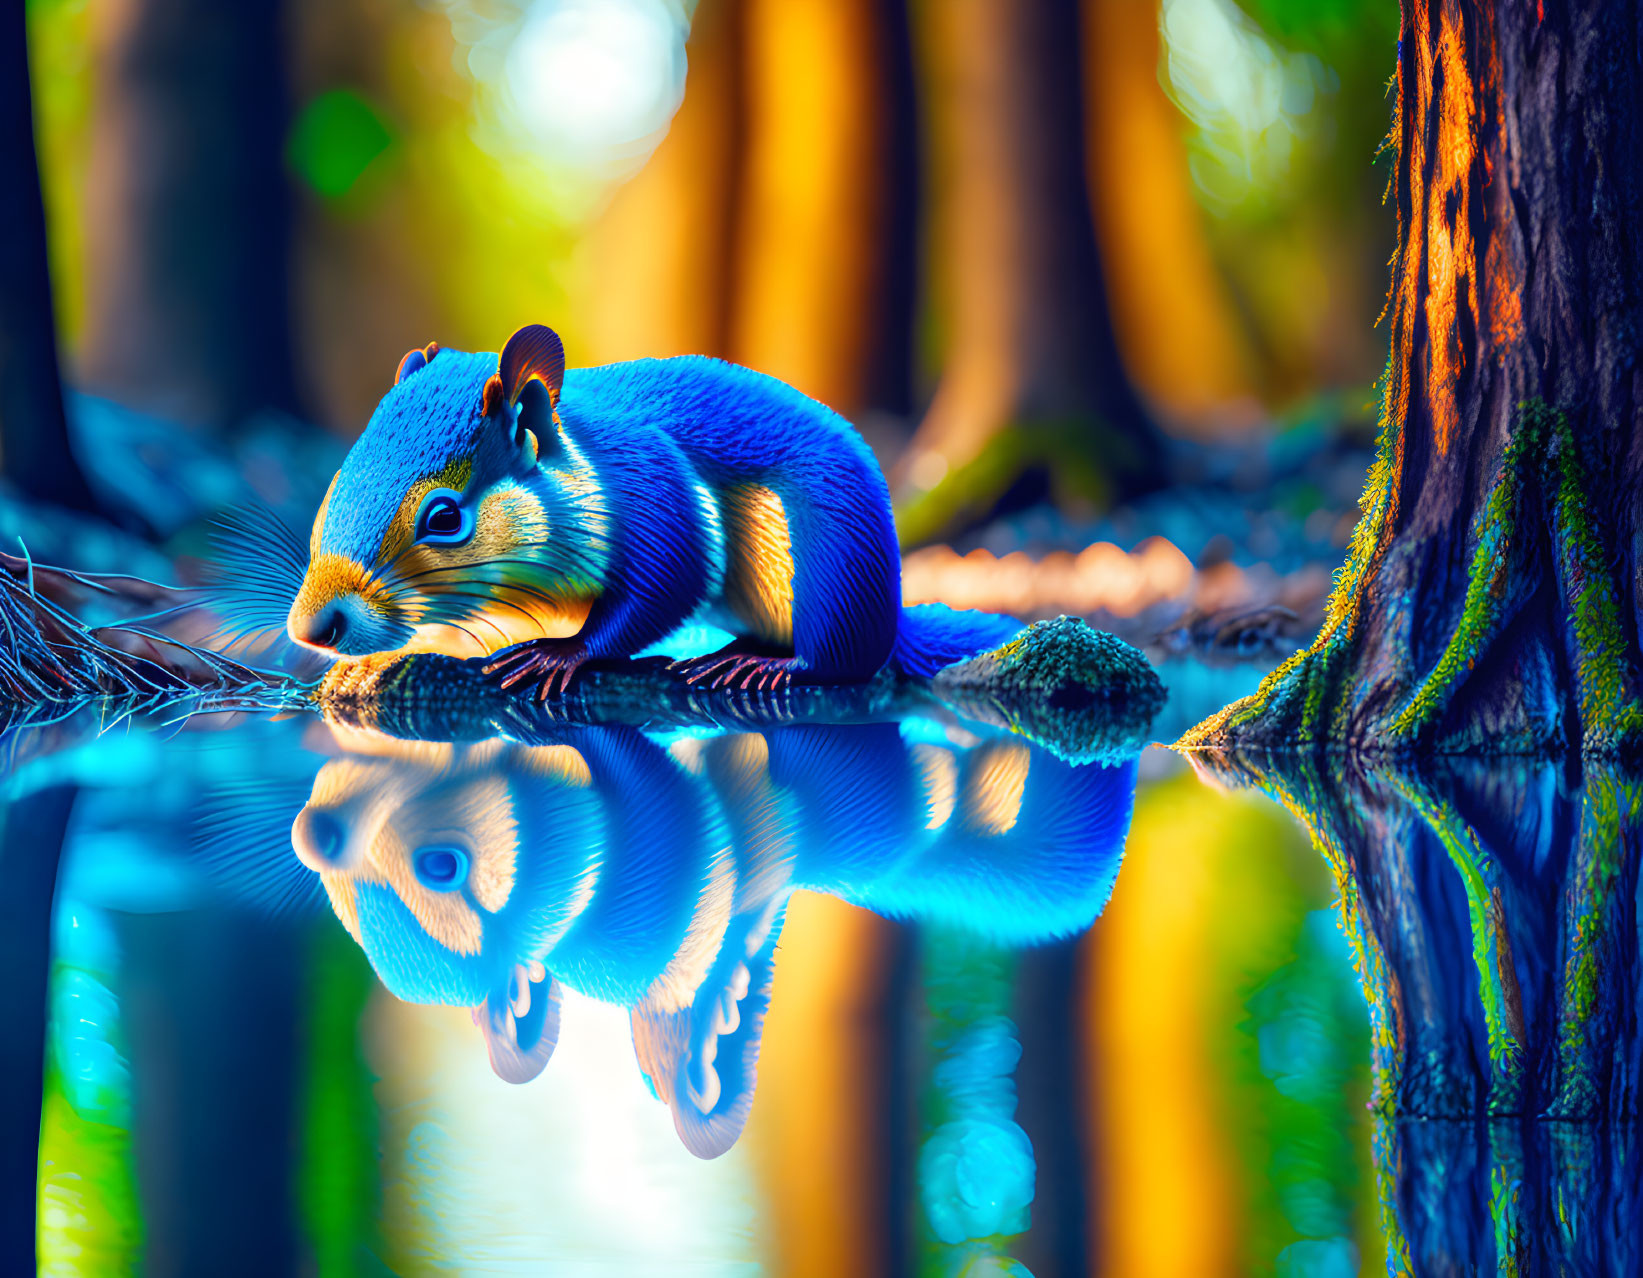 Blue squirrel on branch with reflection in tranquil water, forest background.